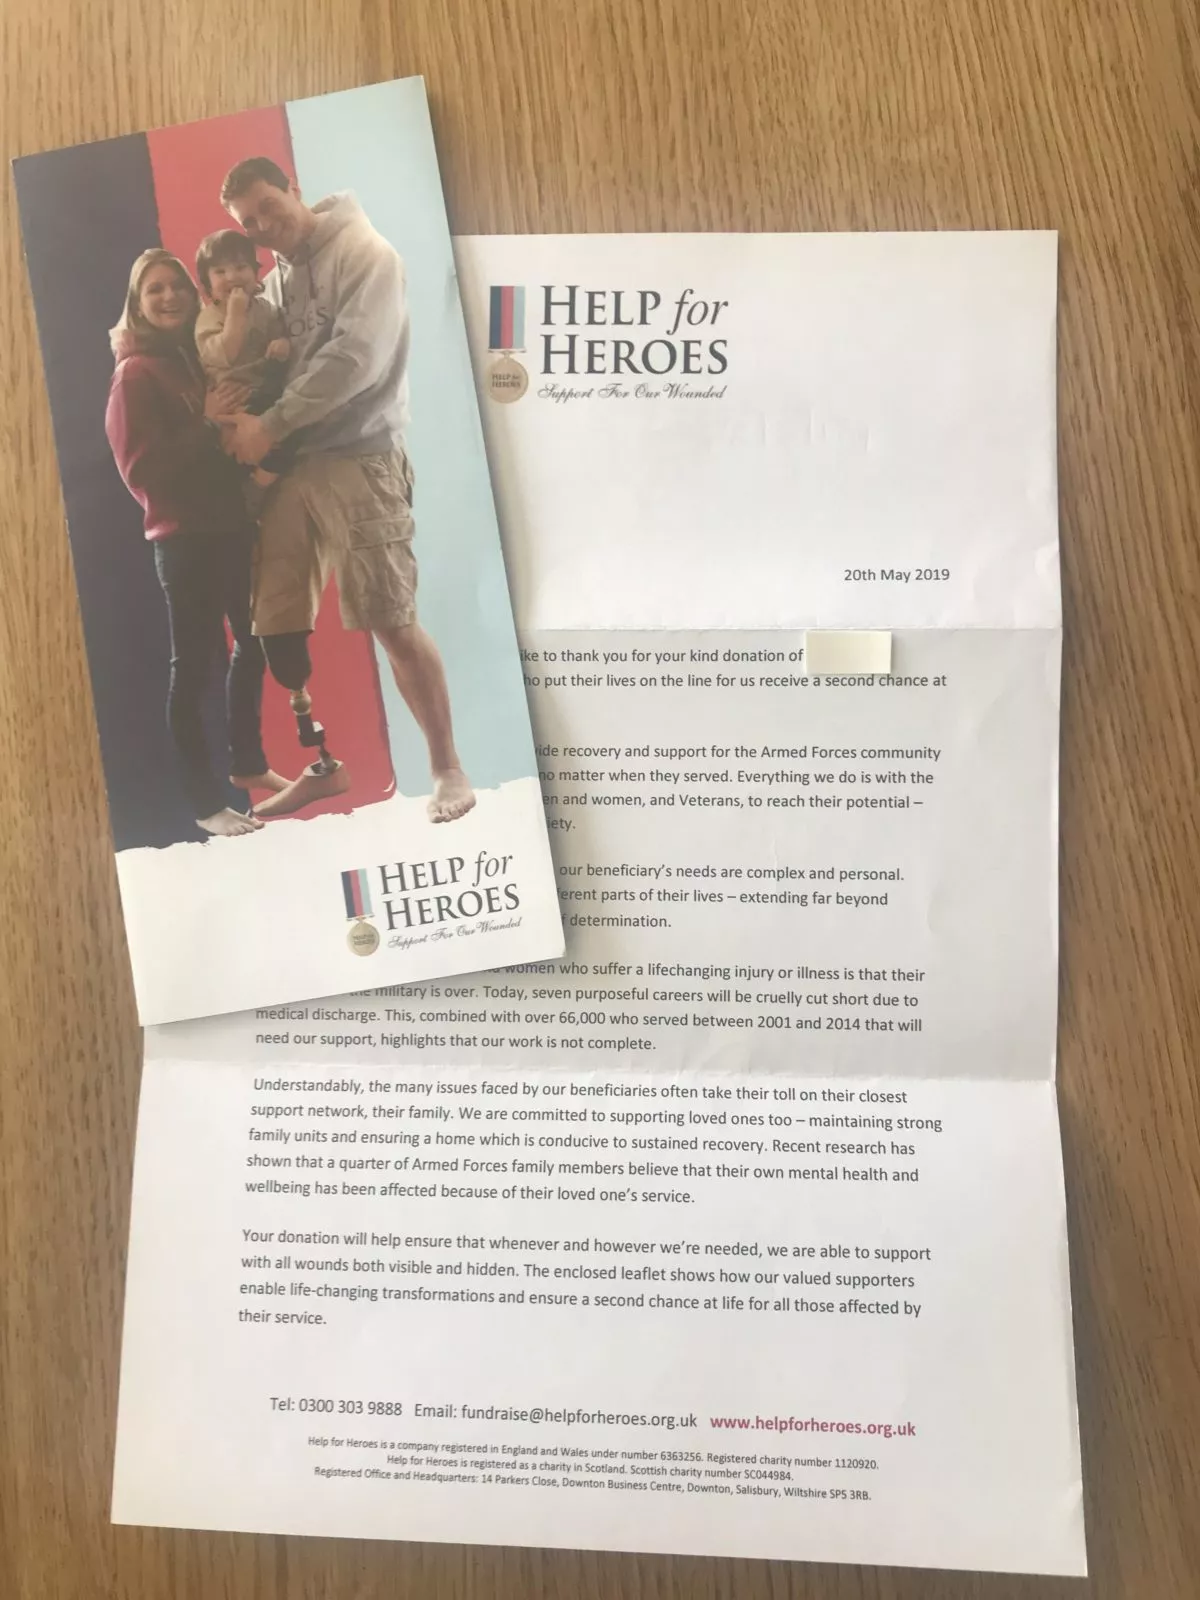 Help for Heroes fundraising letter sent to a secret giver